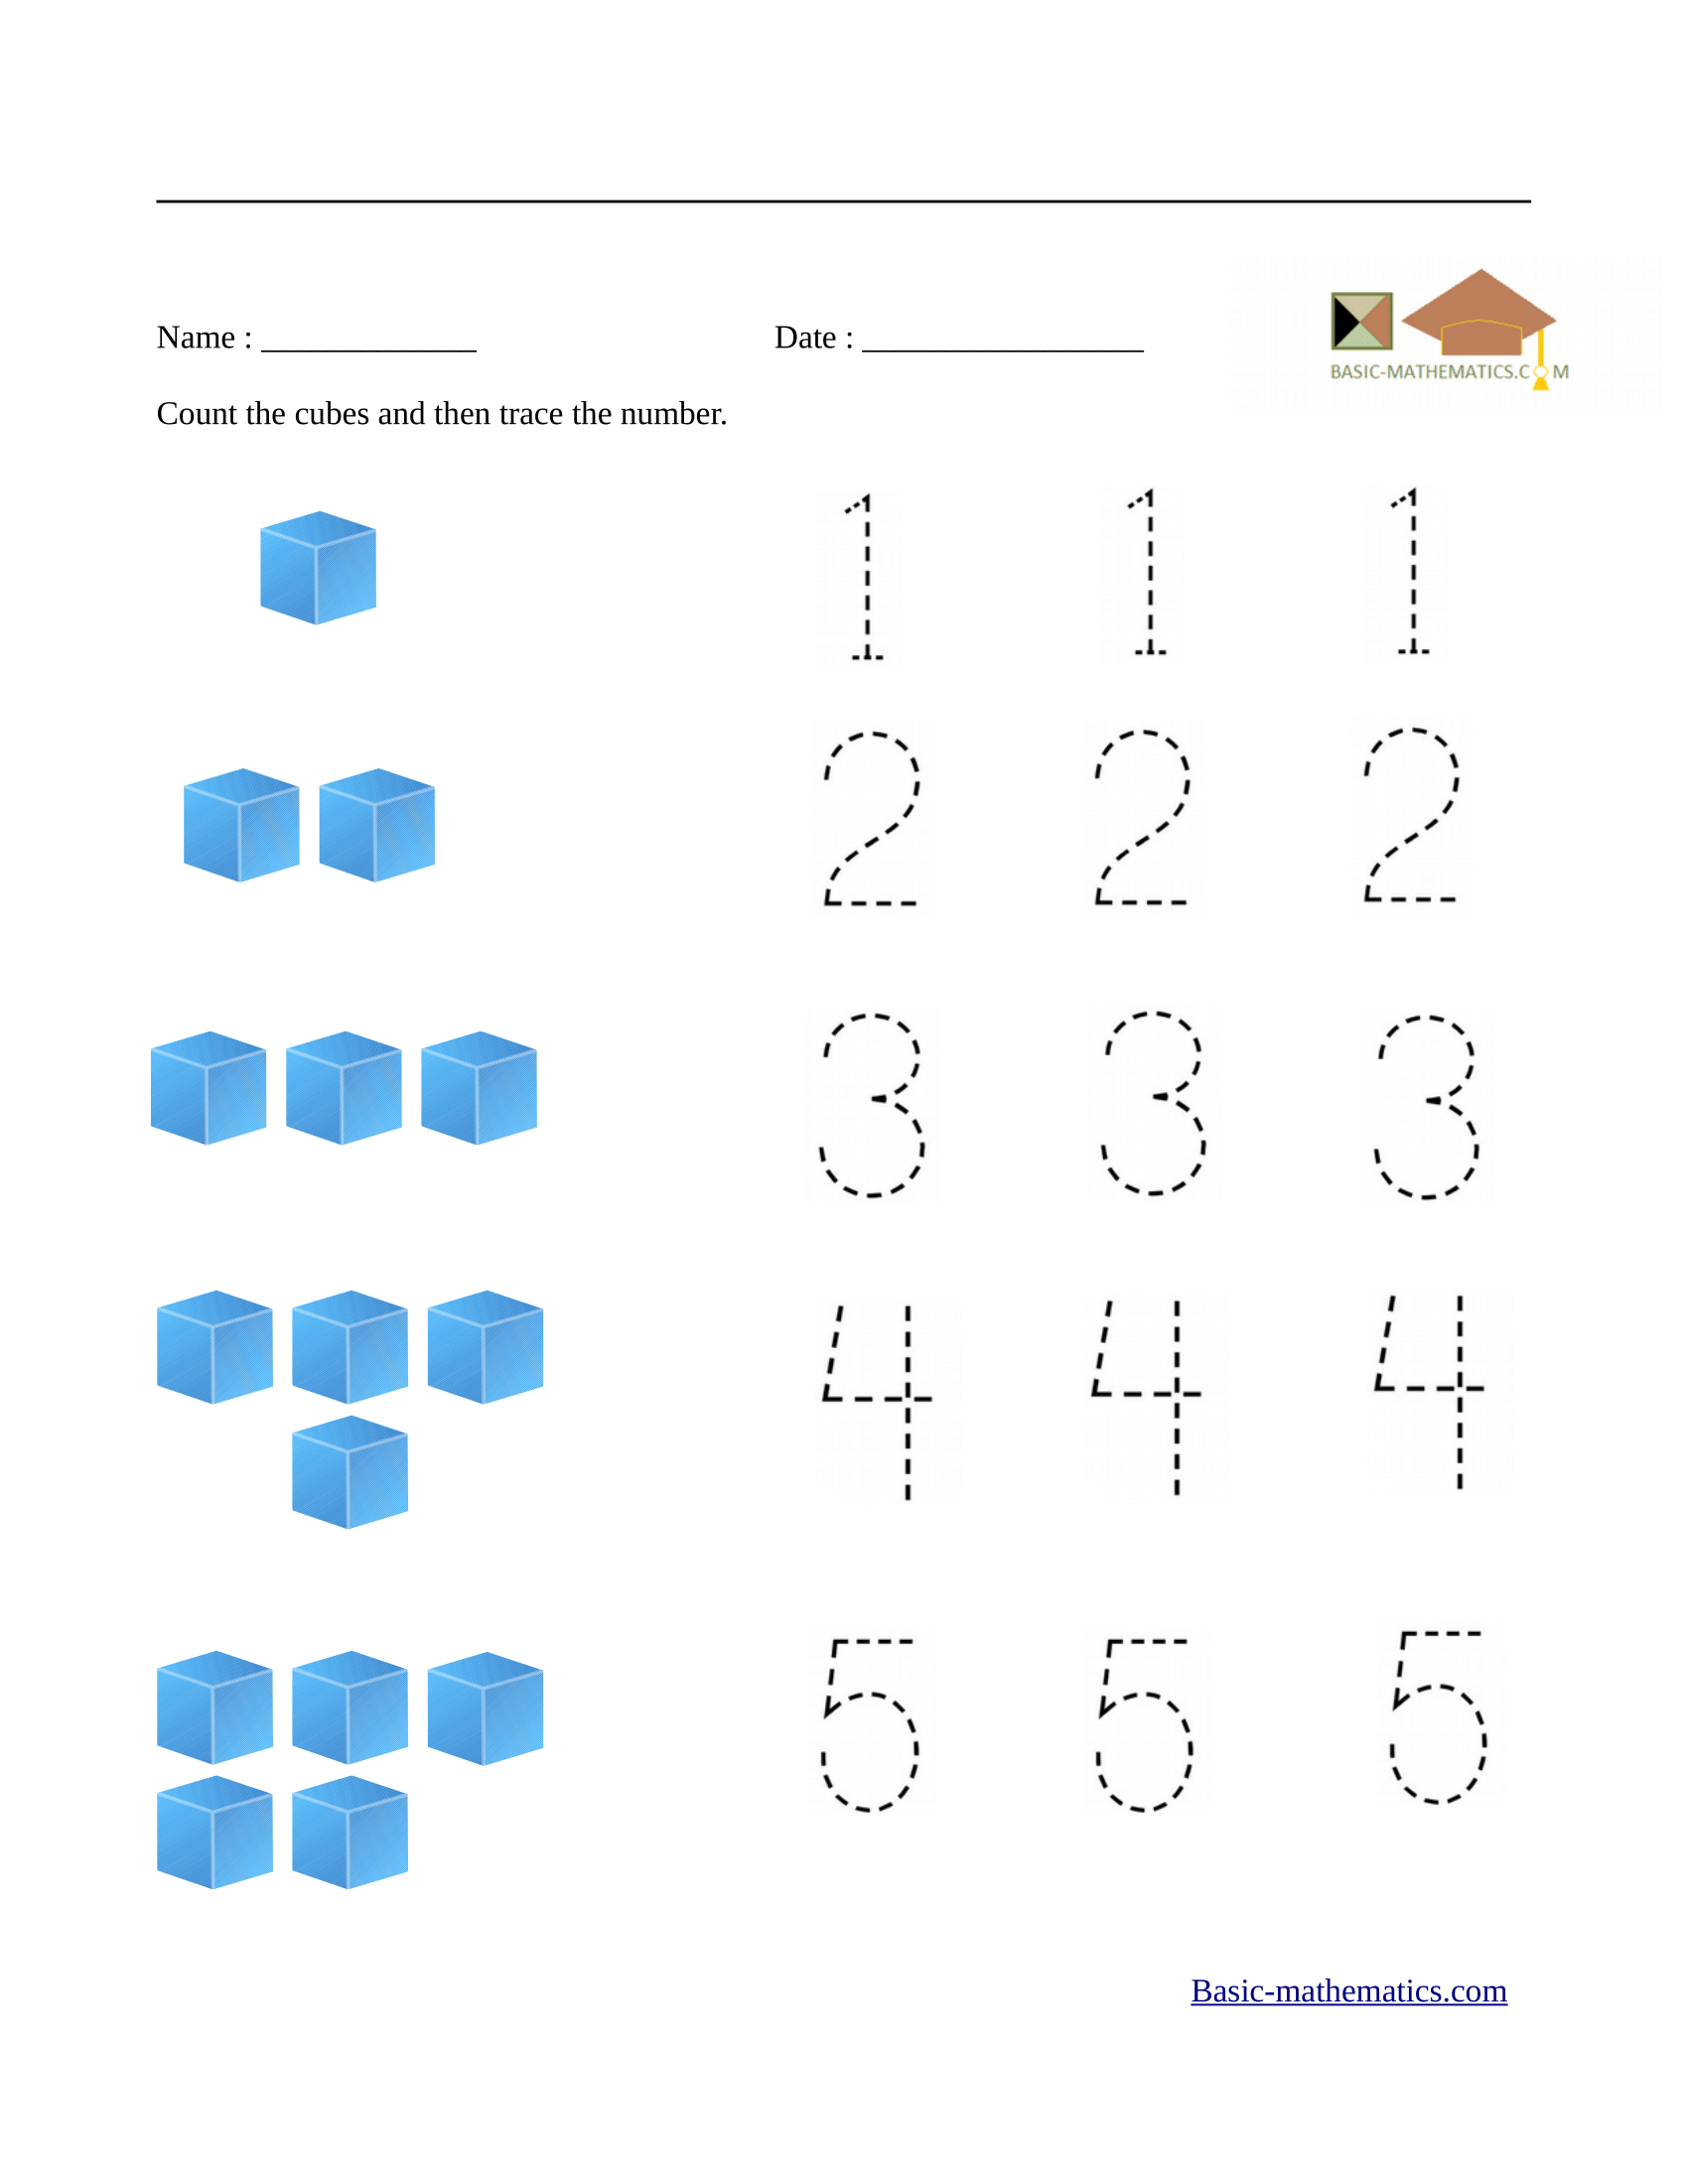 Count and trace numbers from 1 to 5